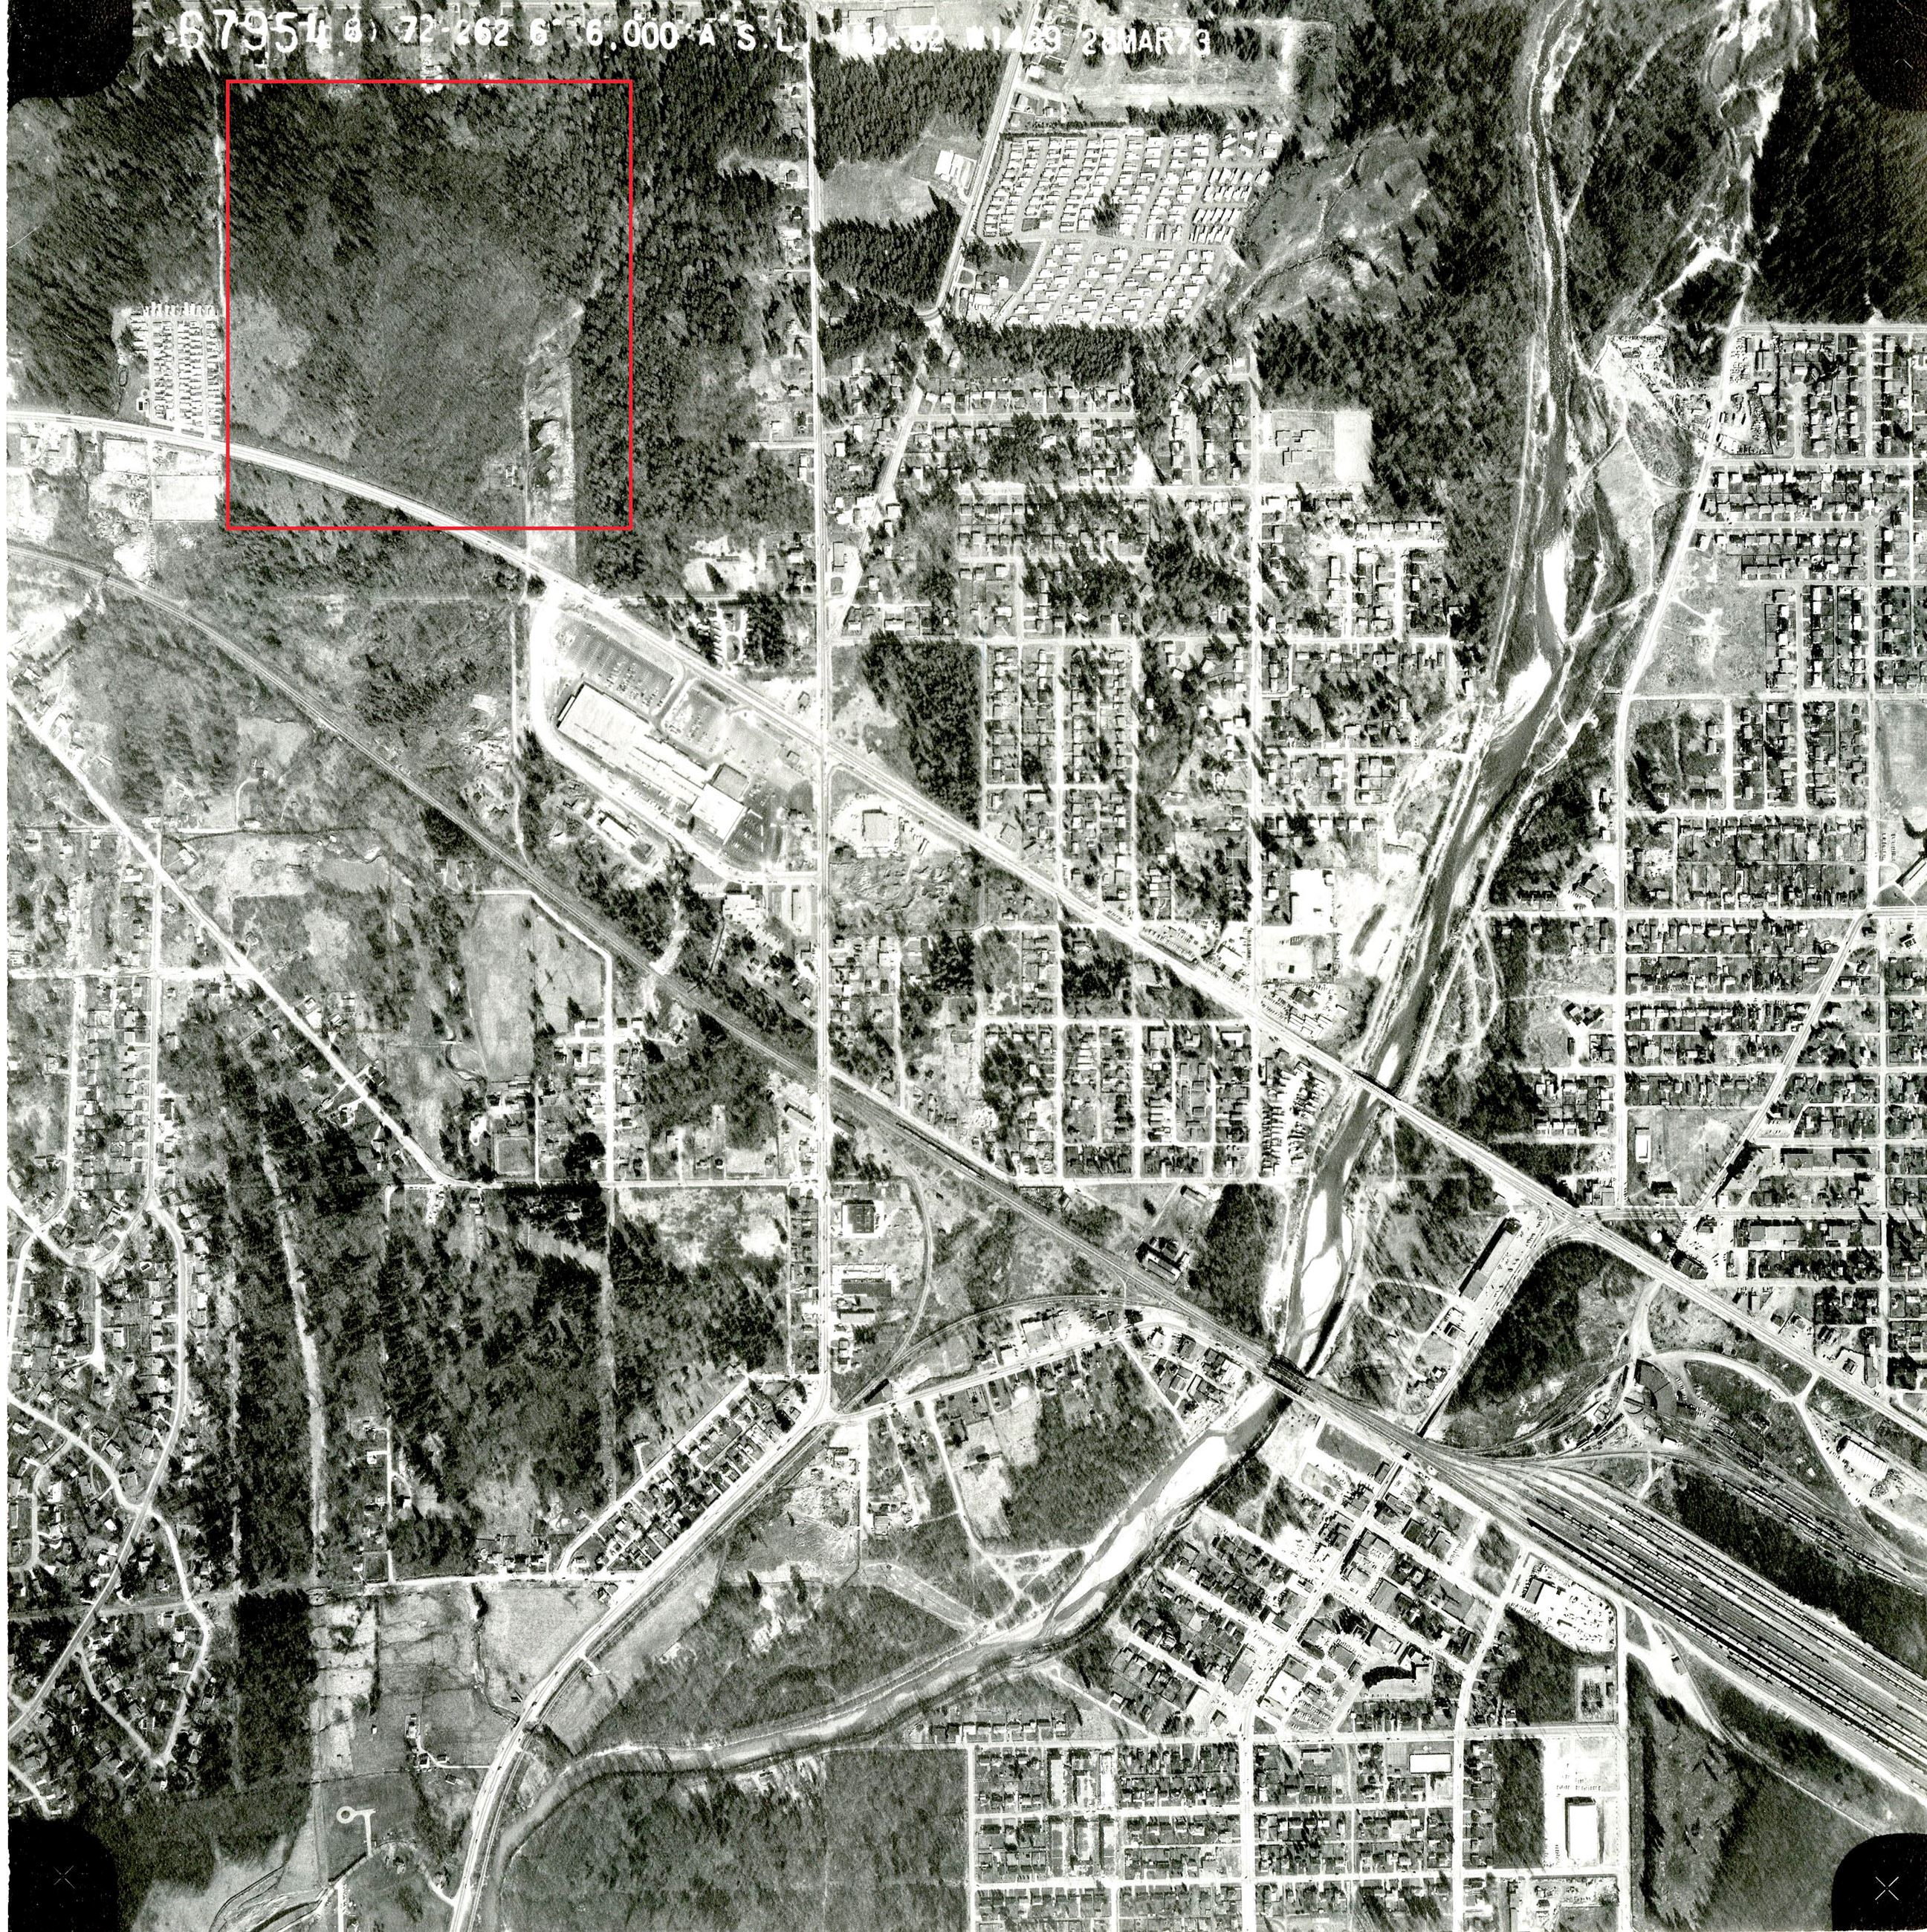 1973 Aerial Photograph (JPG) Opens in new window